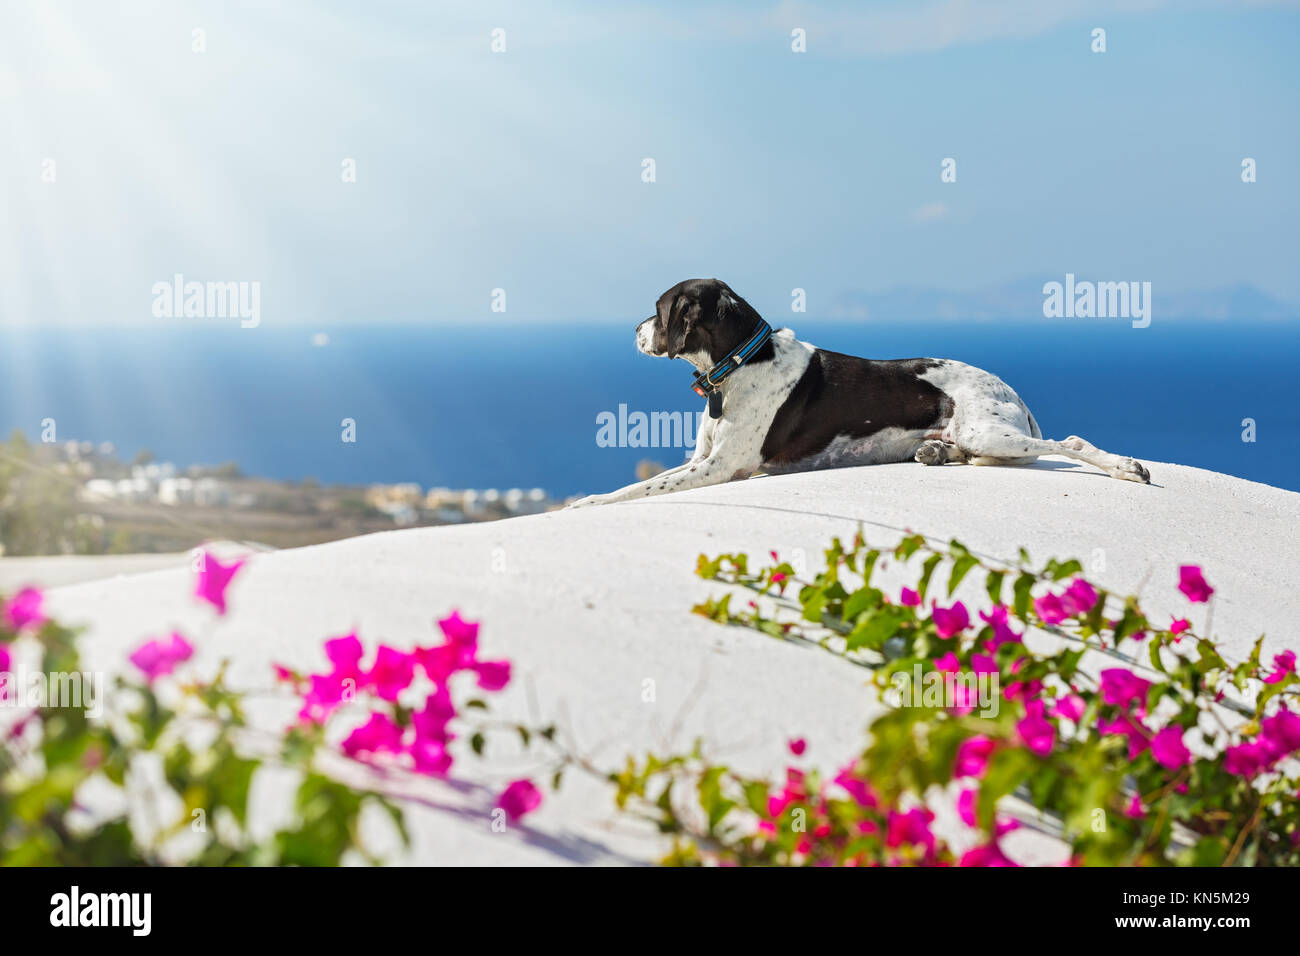 Dog on the roof of a building, Santorini, against a blue sea and a flowering Bush Stock Photo